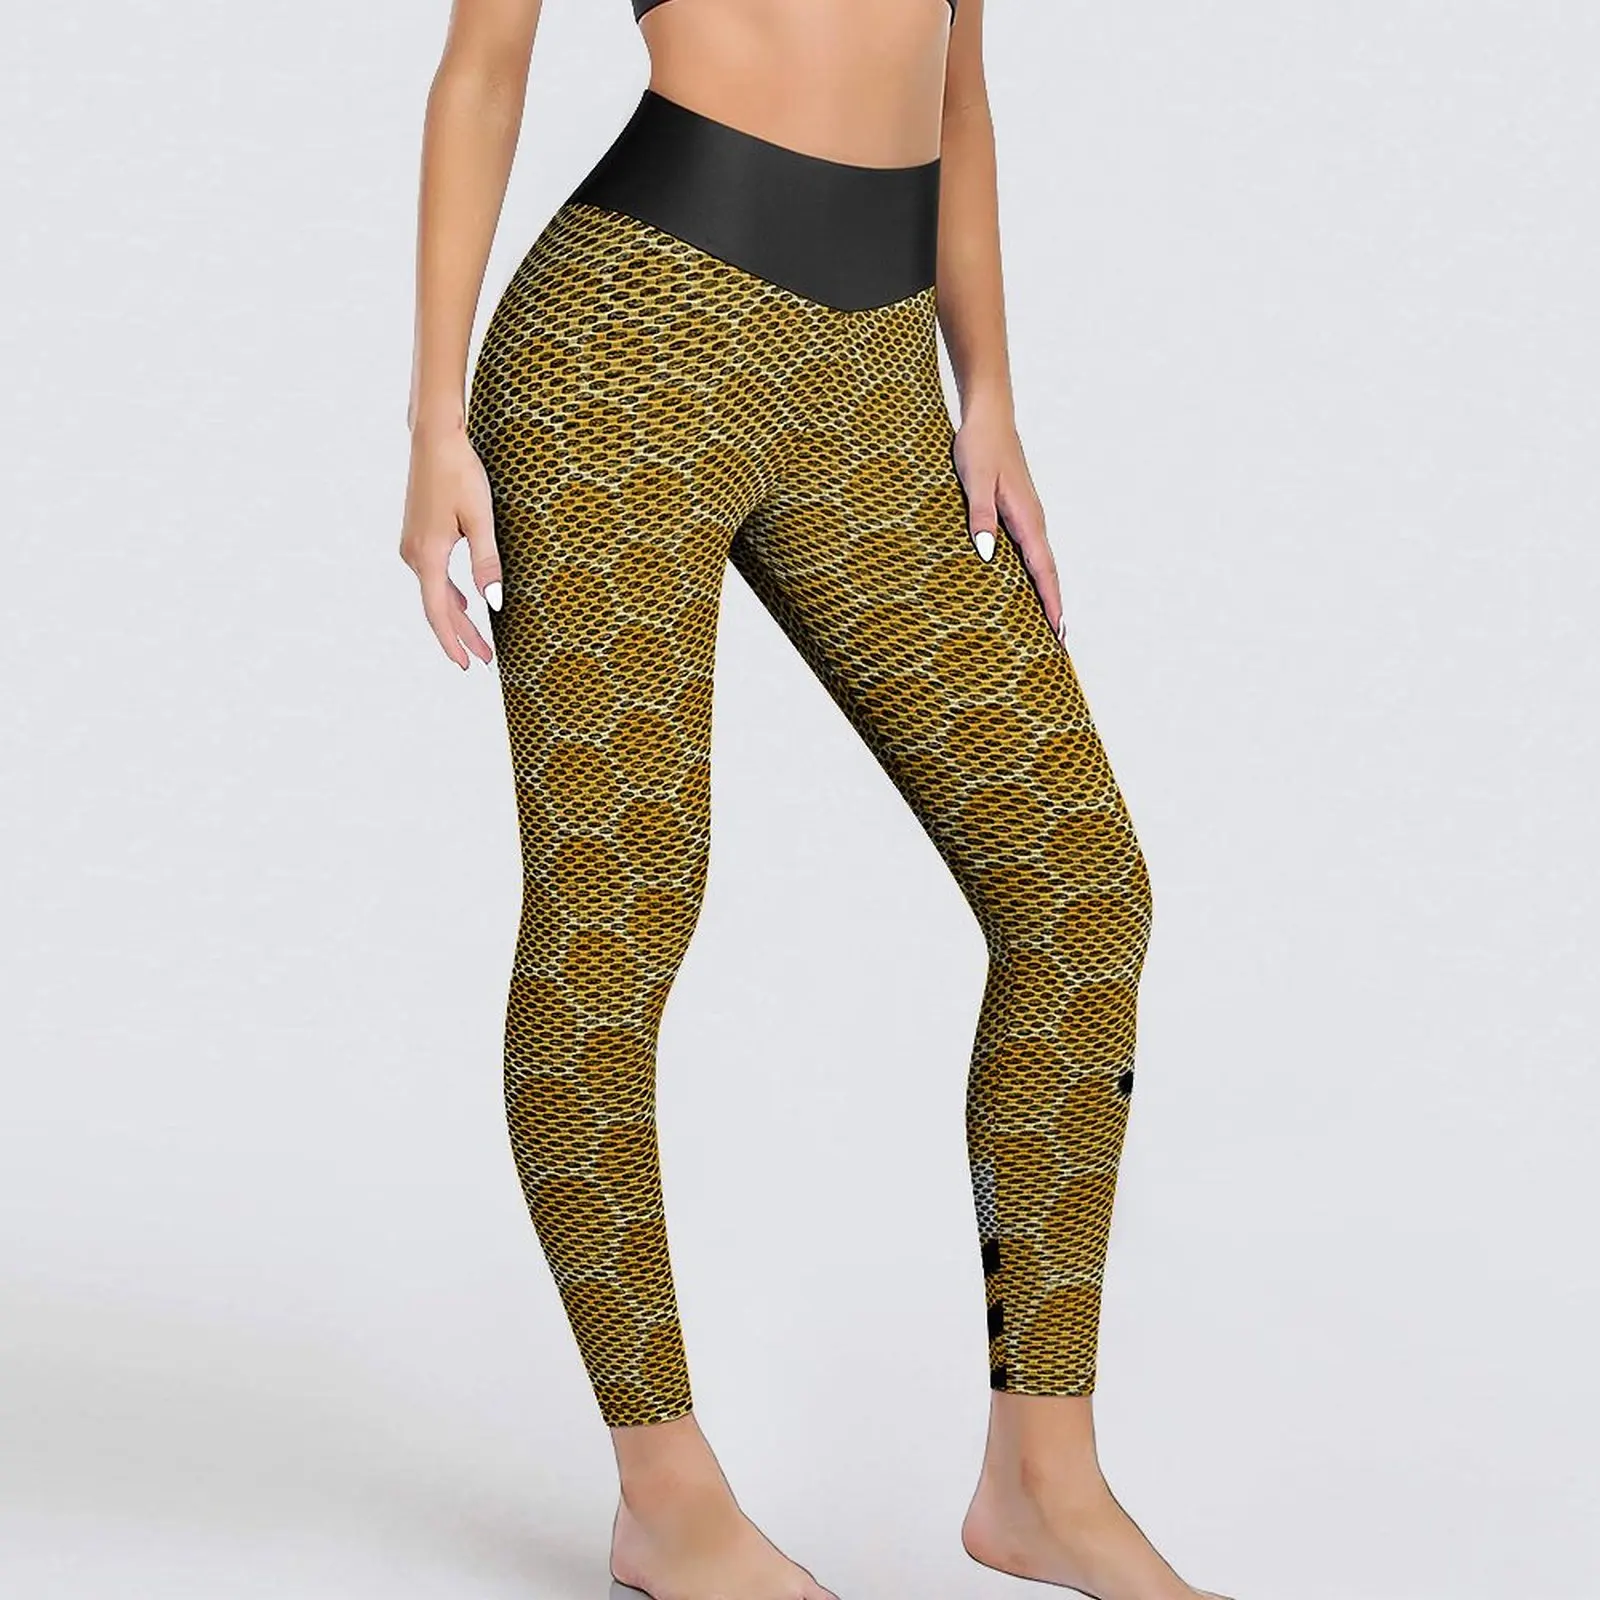 Bumble Bees Leggings Cute Honeycomb Print Work Out Yoga Pants Female Push Up Novelty Leggins Sexy Seamless Graphic Sports Tights images - 1